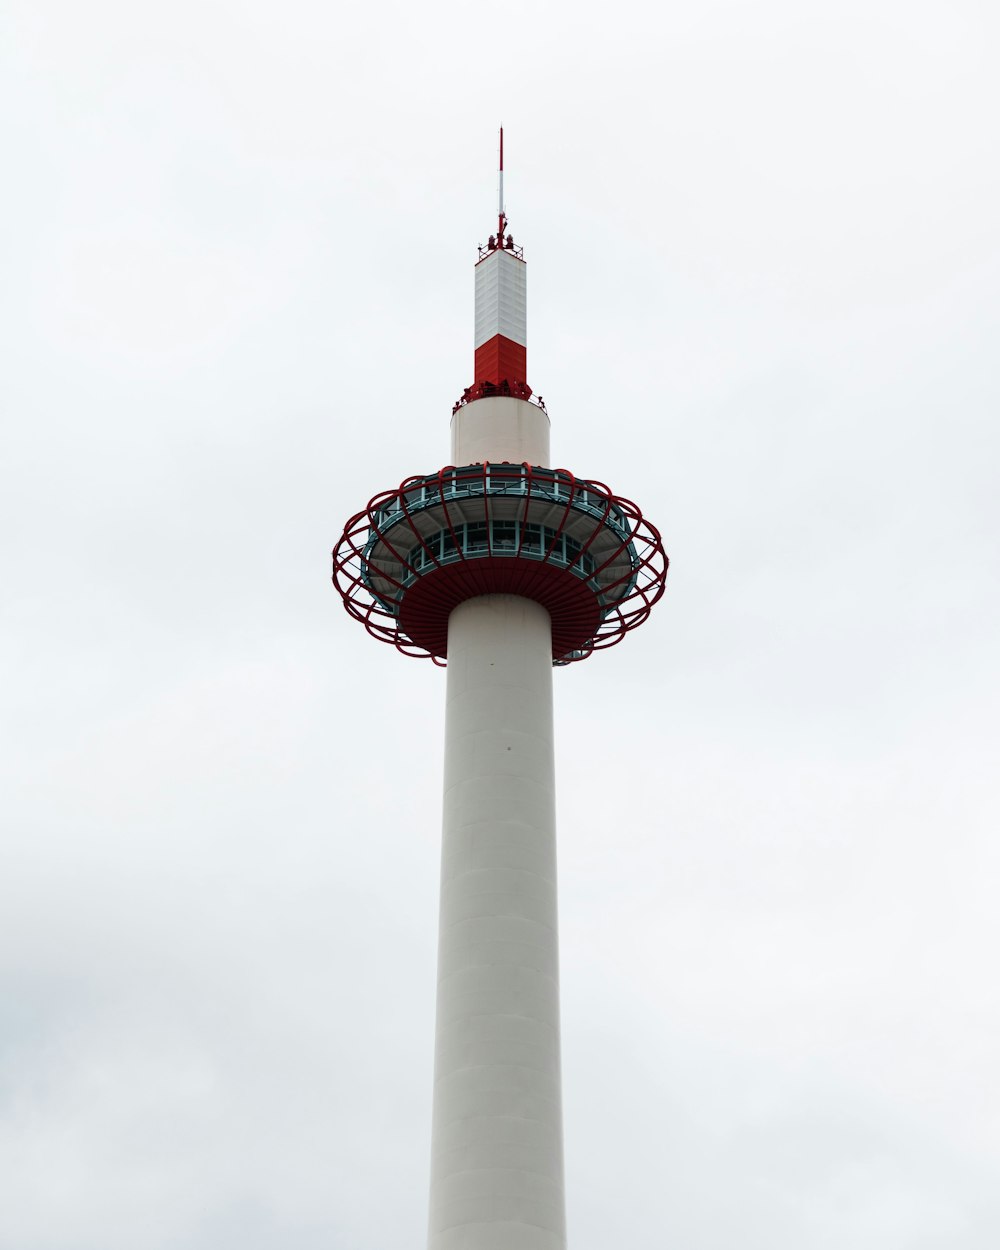 a tall white and red tower with a red top